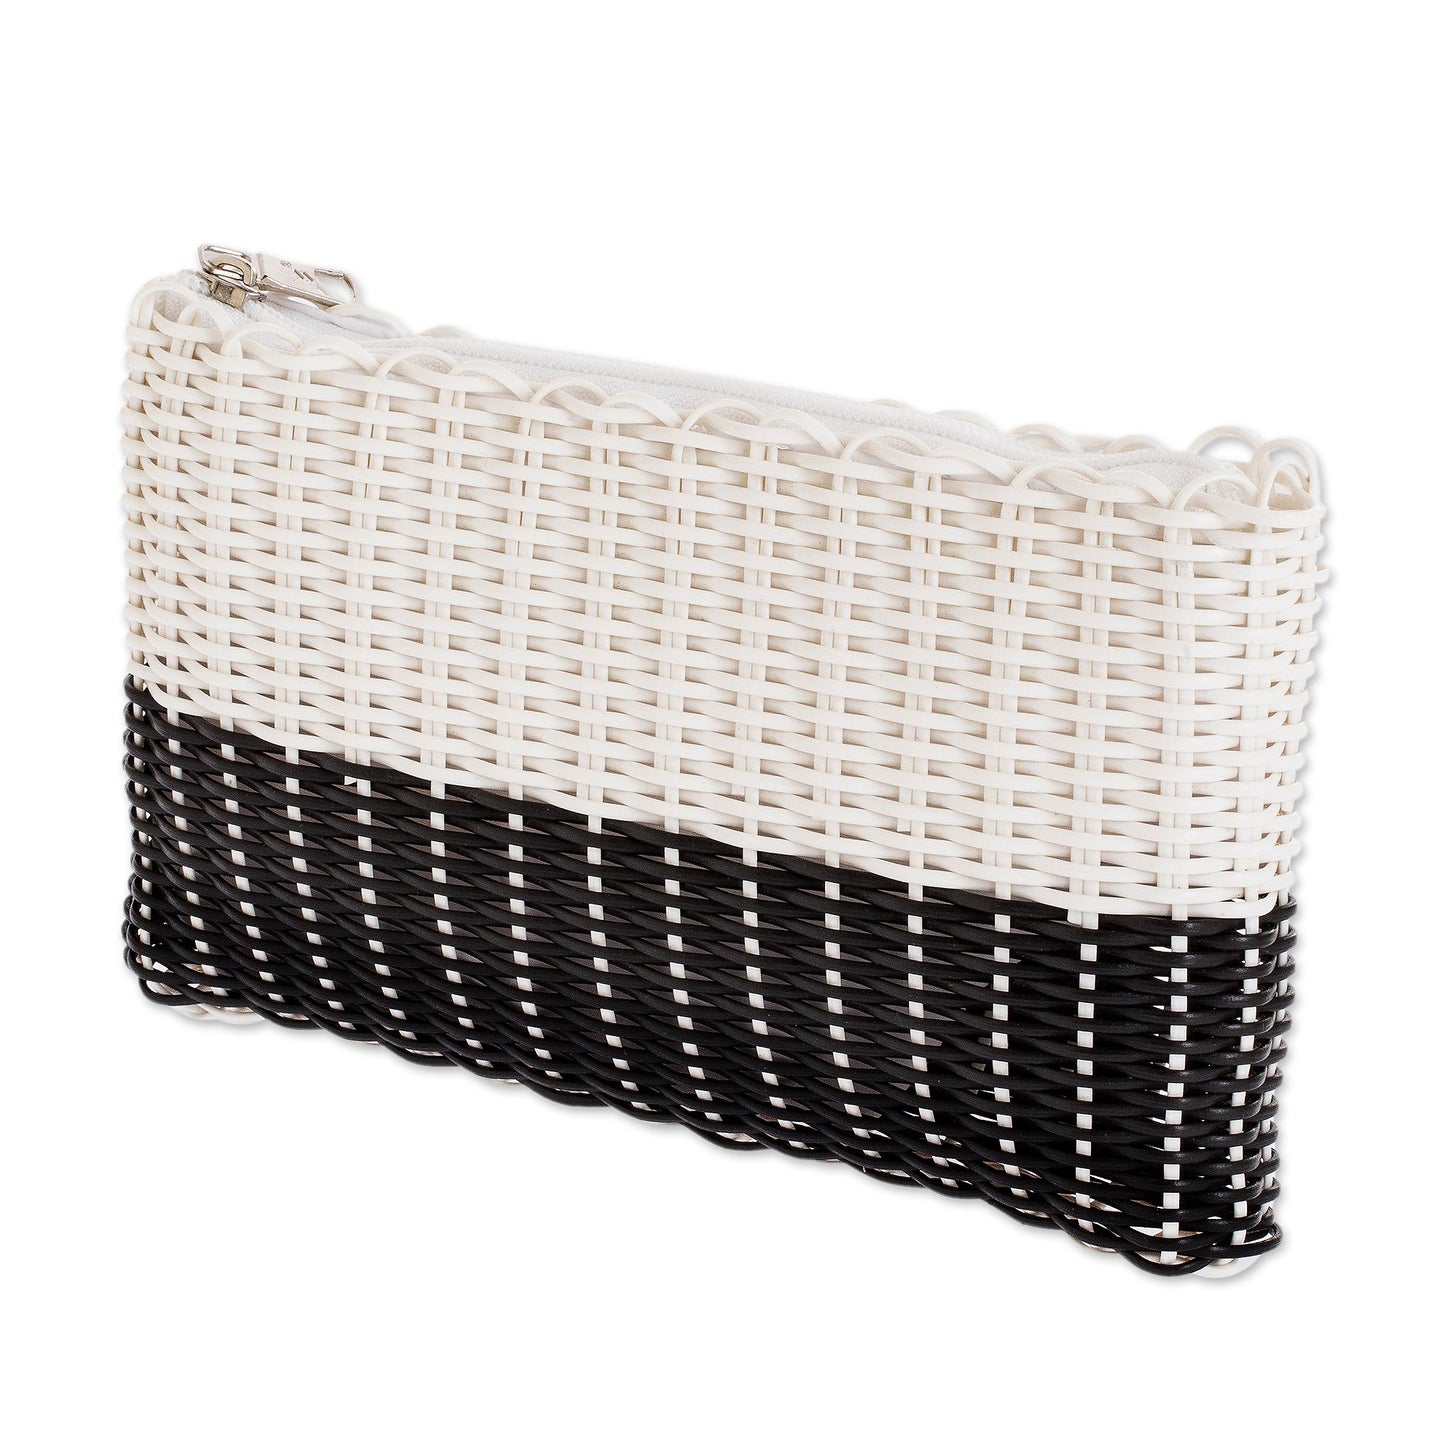 White on Black Bicolor Recycled Central American Plastic Cosmetic Bag